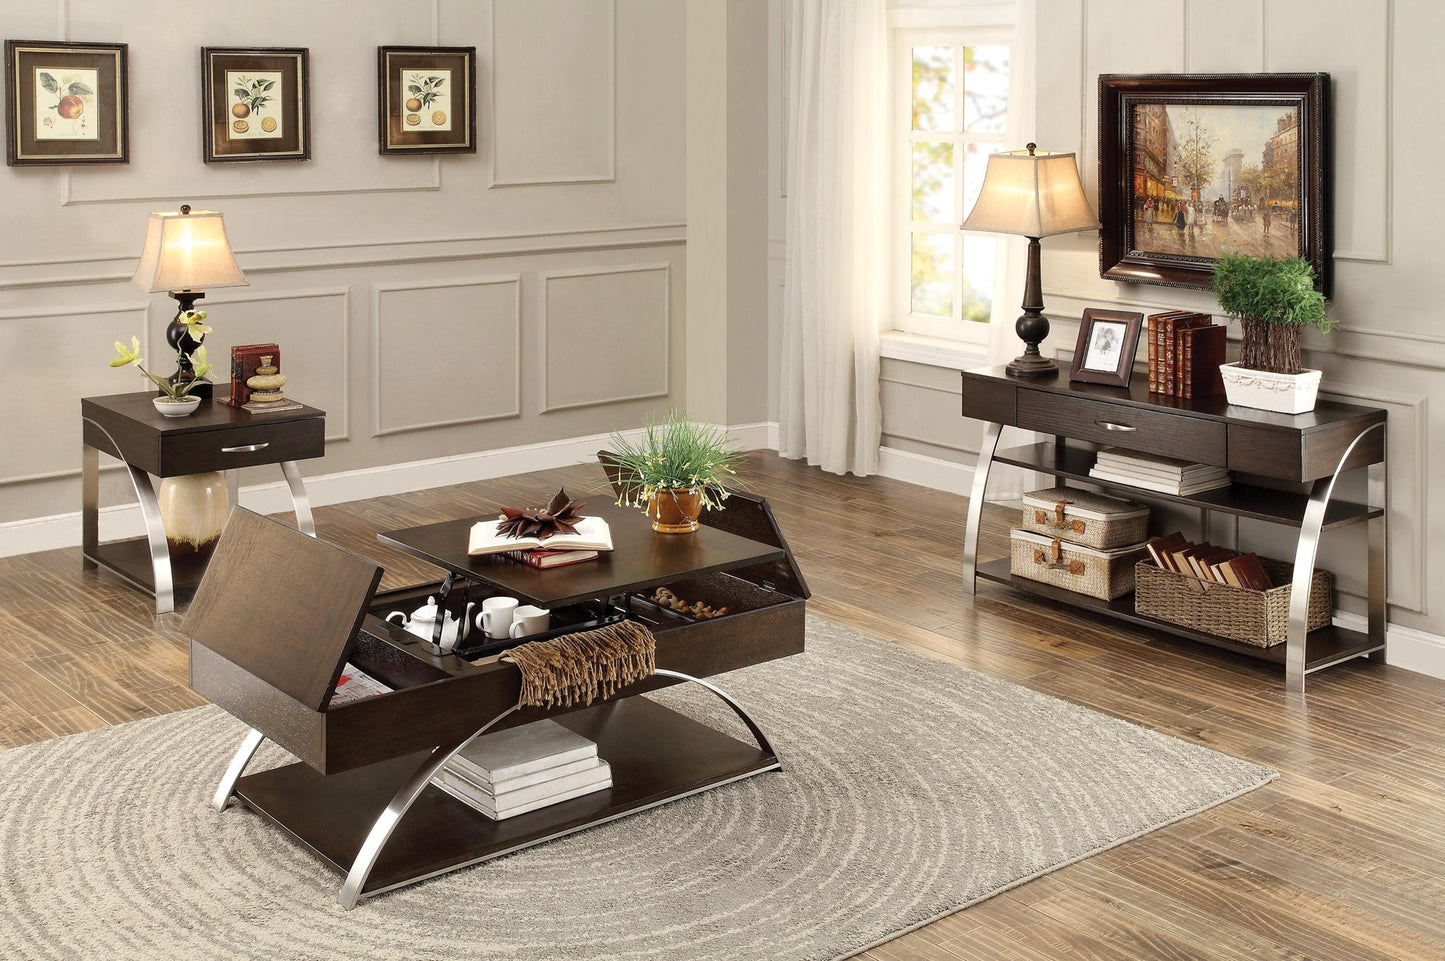 Homelegance Tioga 2PC Occasional Set Lift Top Cocktail Table with Storagen 1 End Table in Espresso